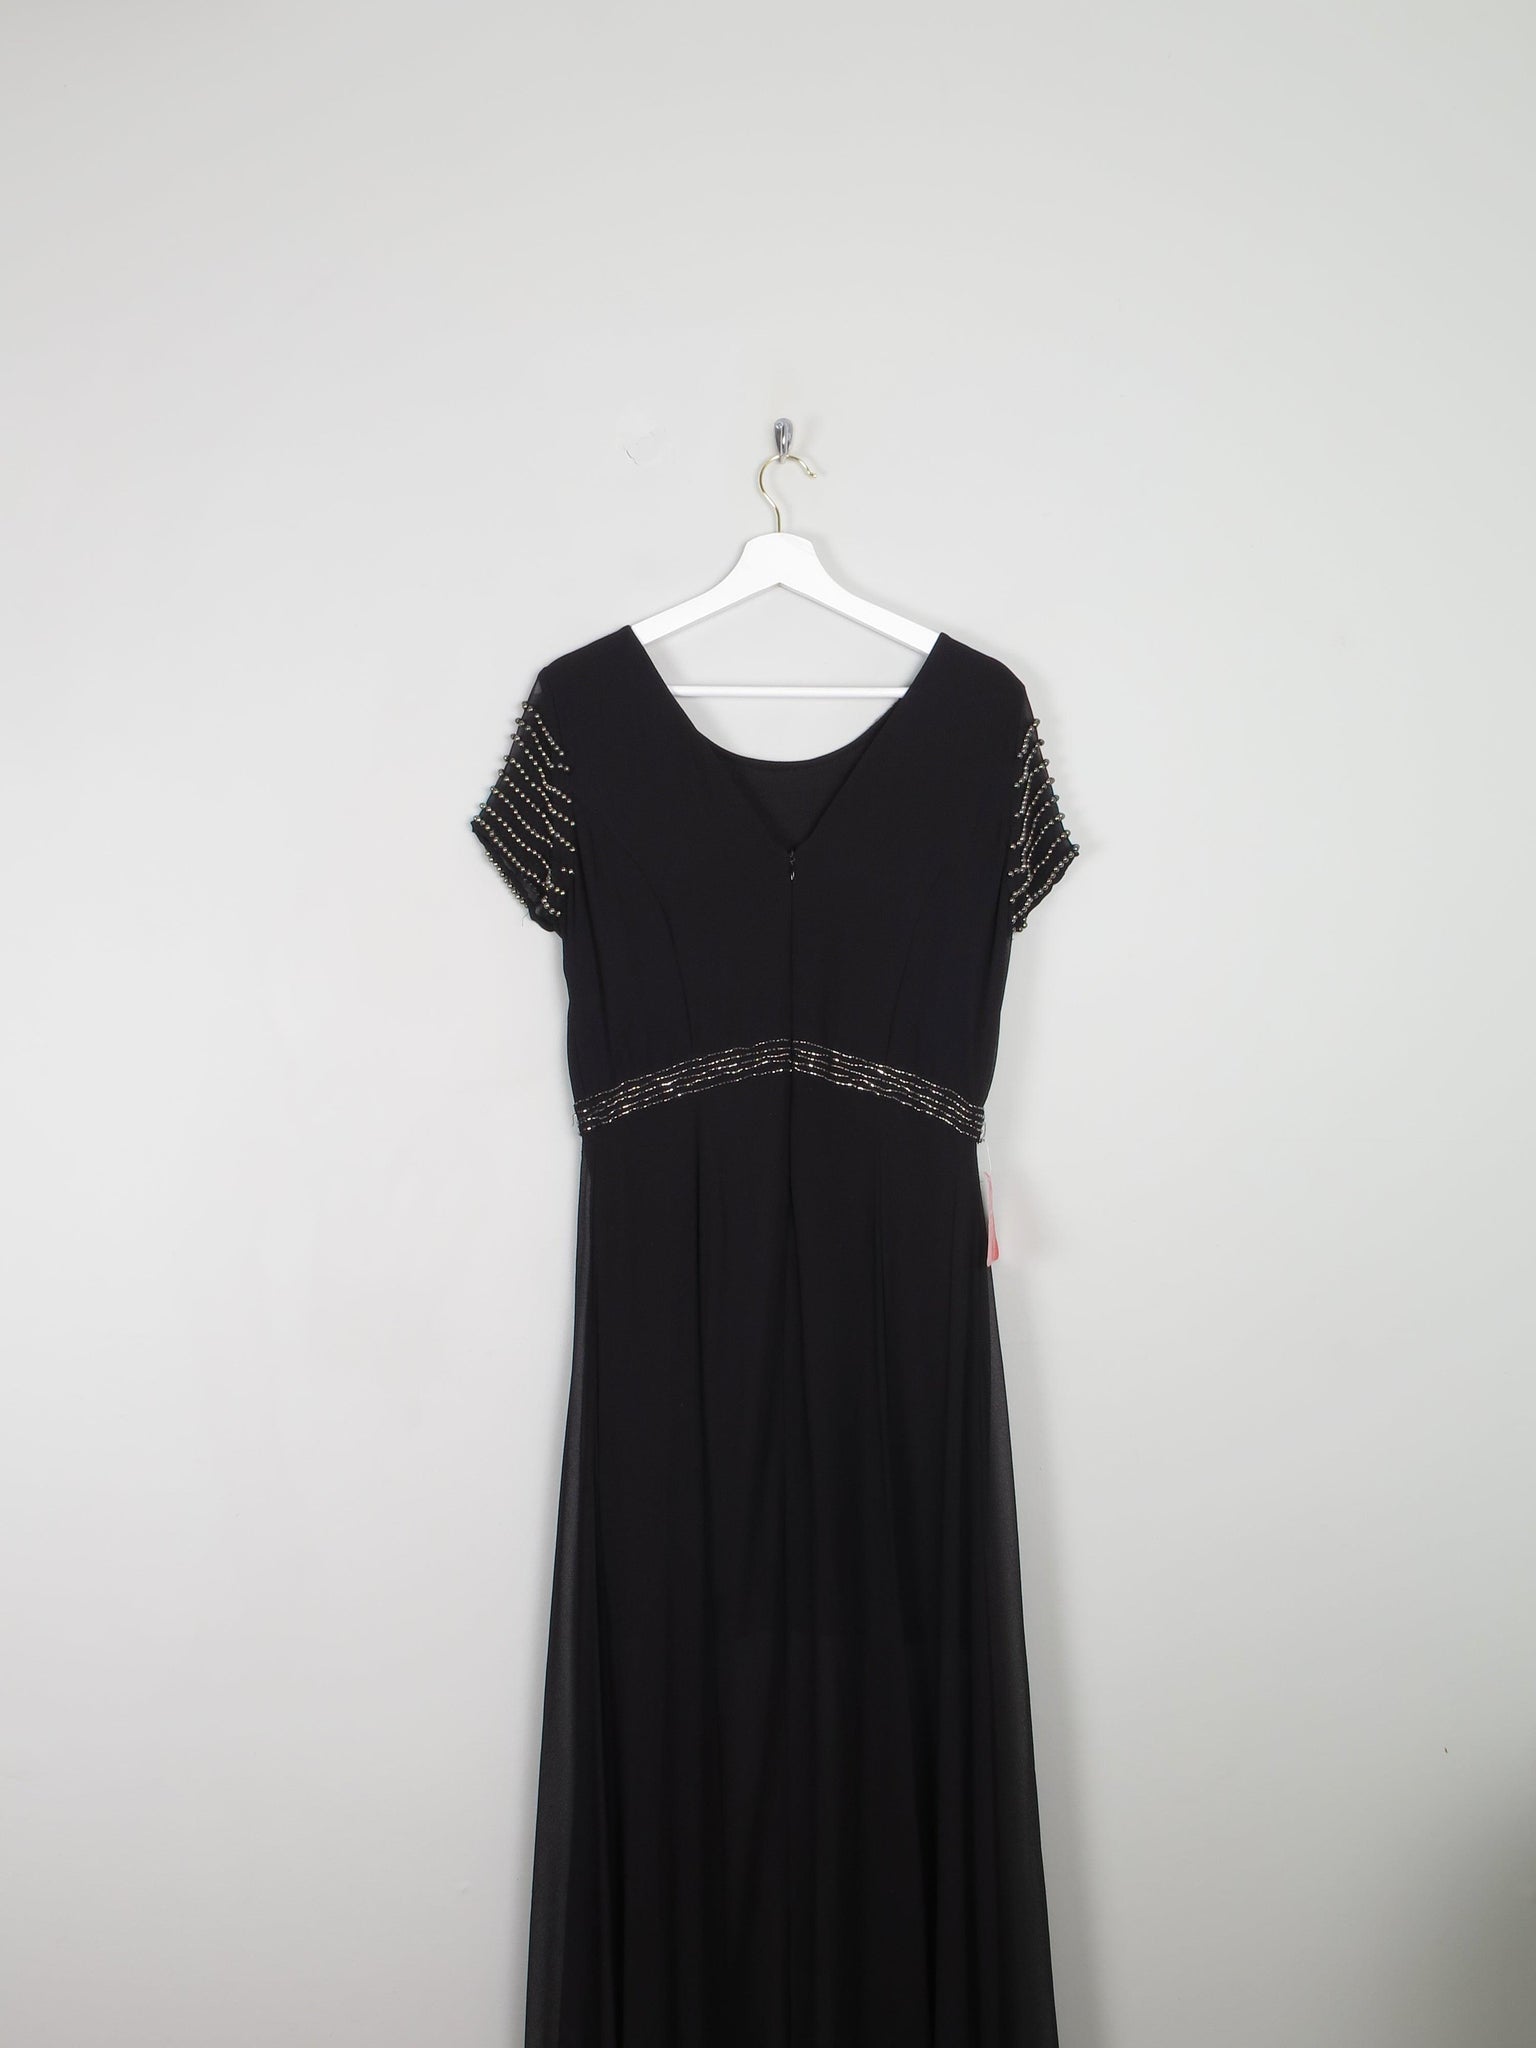 Black Full Length Vintage Style Chiffon Dress With Beading New 12 - The Harlequin